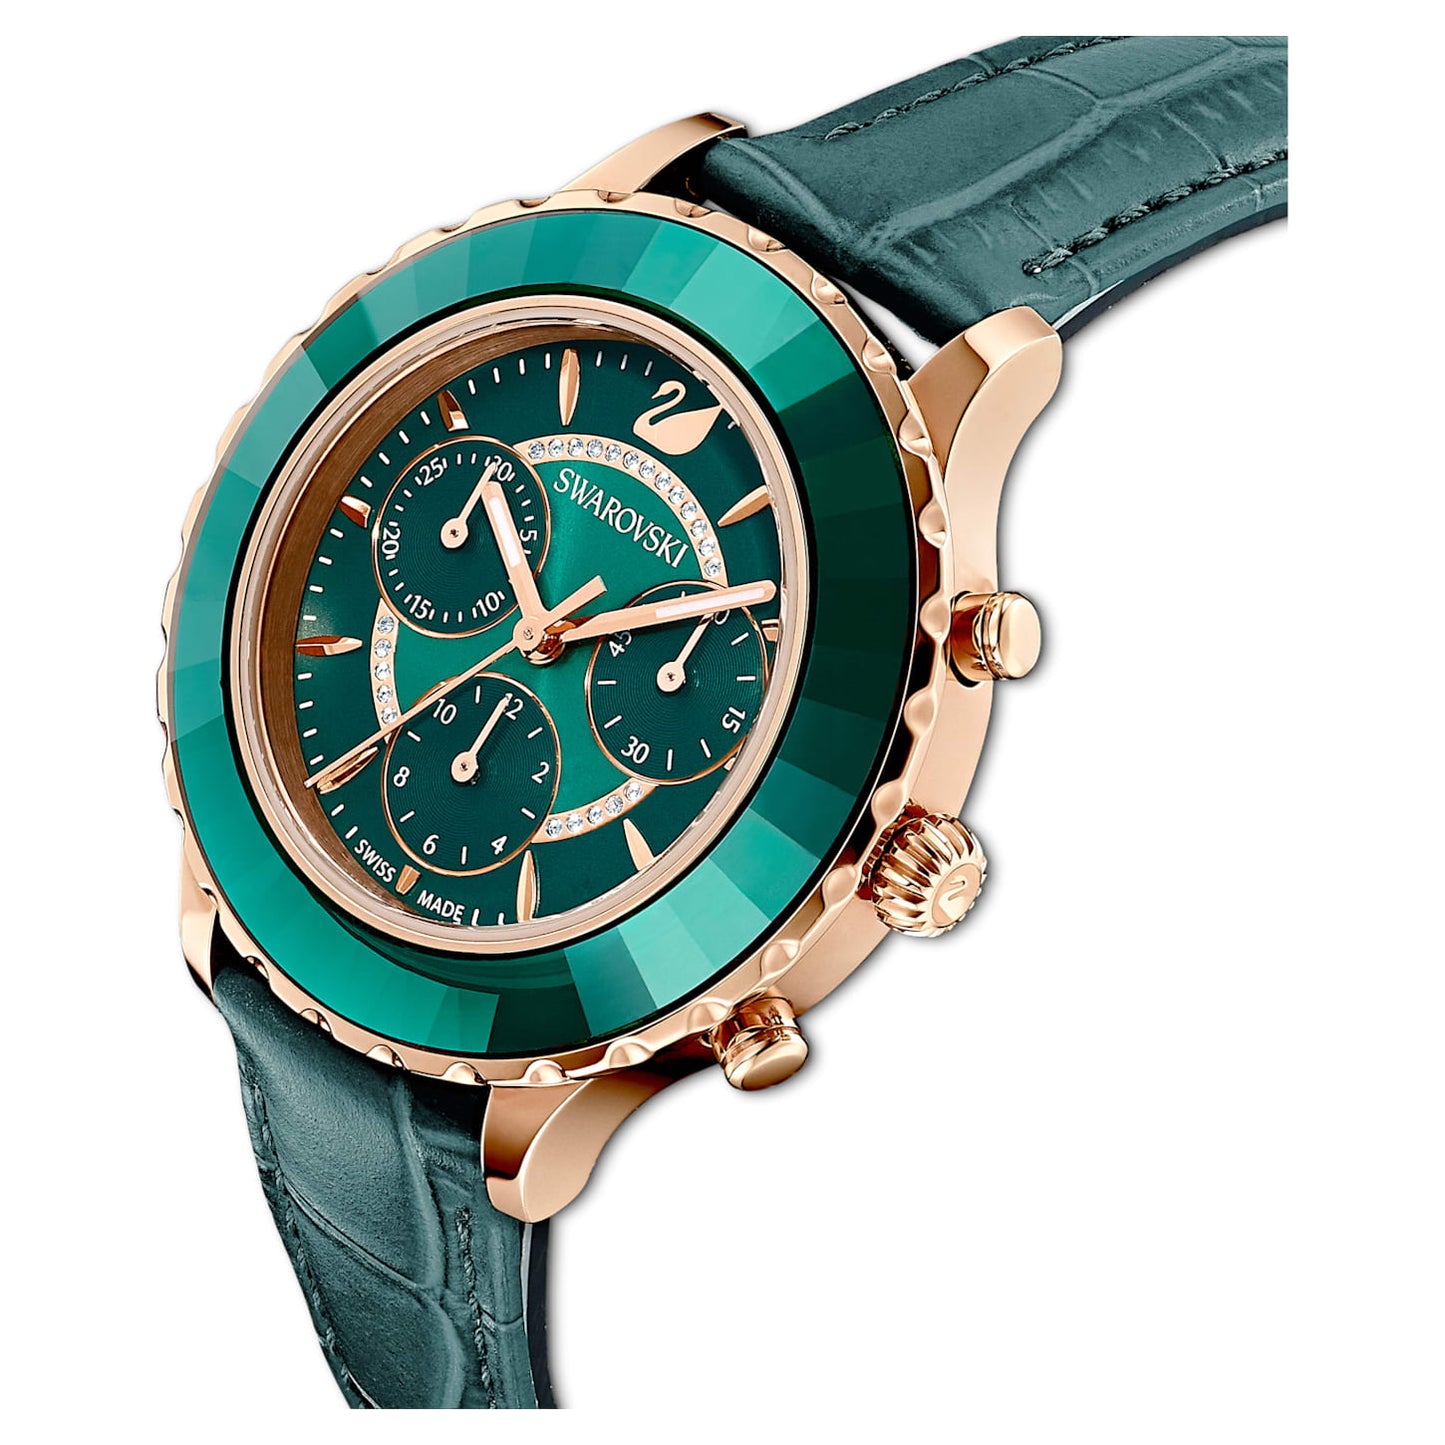 Octea Lux Chrono watch Swiss Made, Leather strap, Green, Rose gold-tone finish